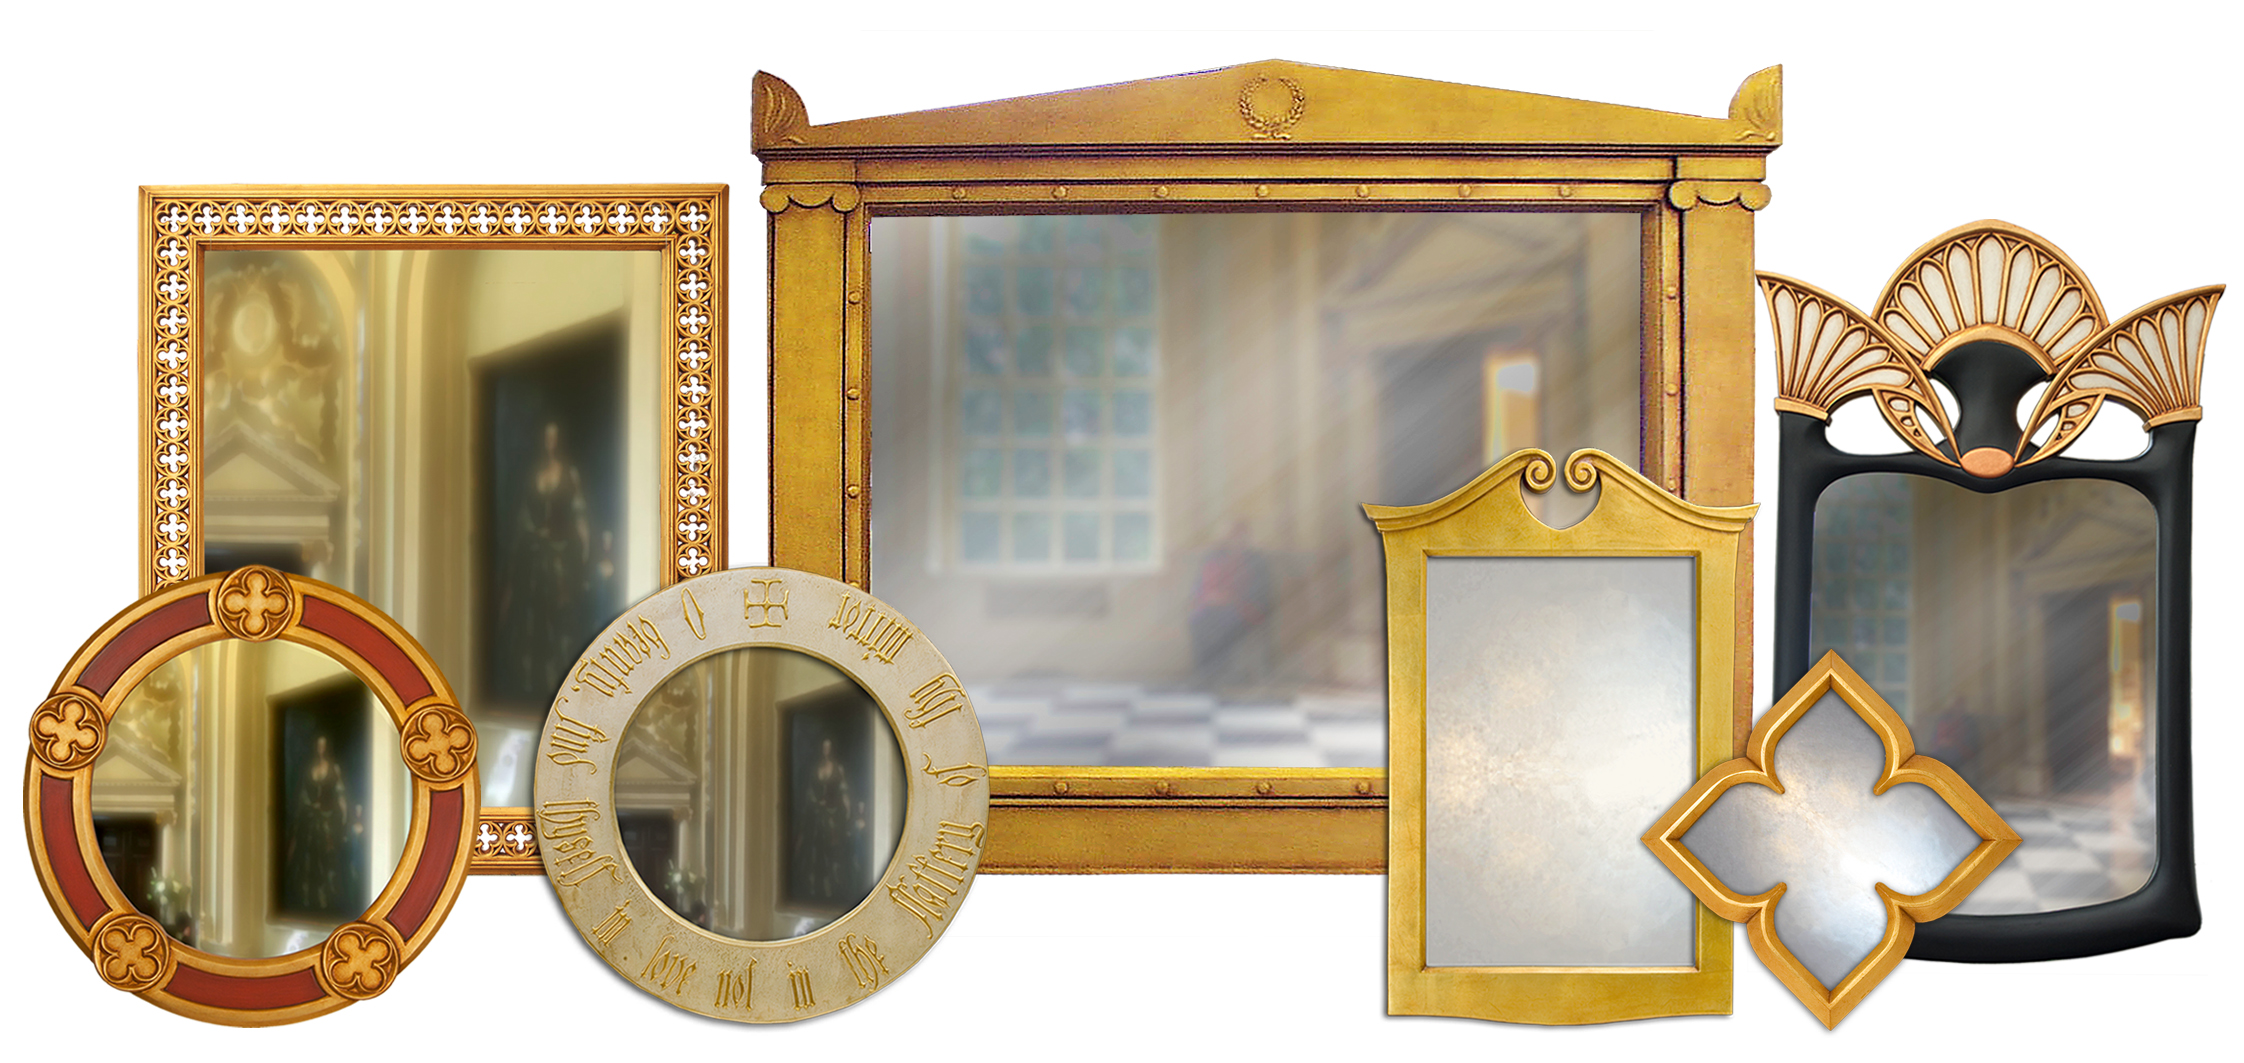 A stunning selection of my handmade decorative mirrors